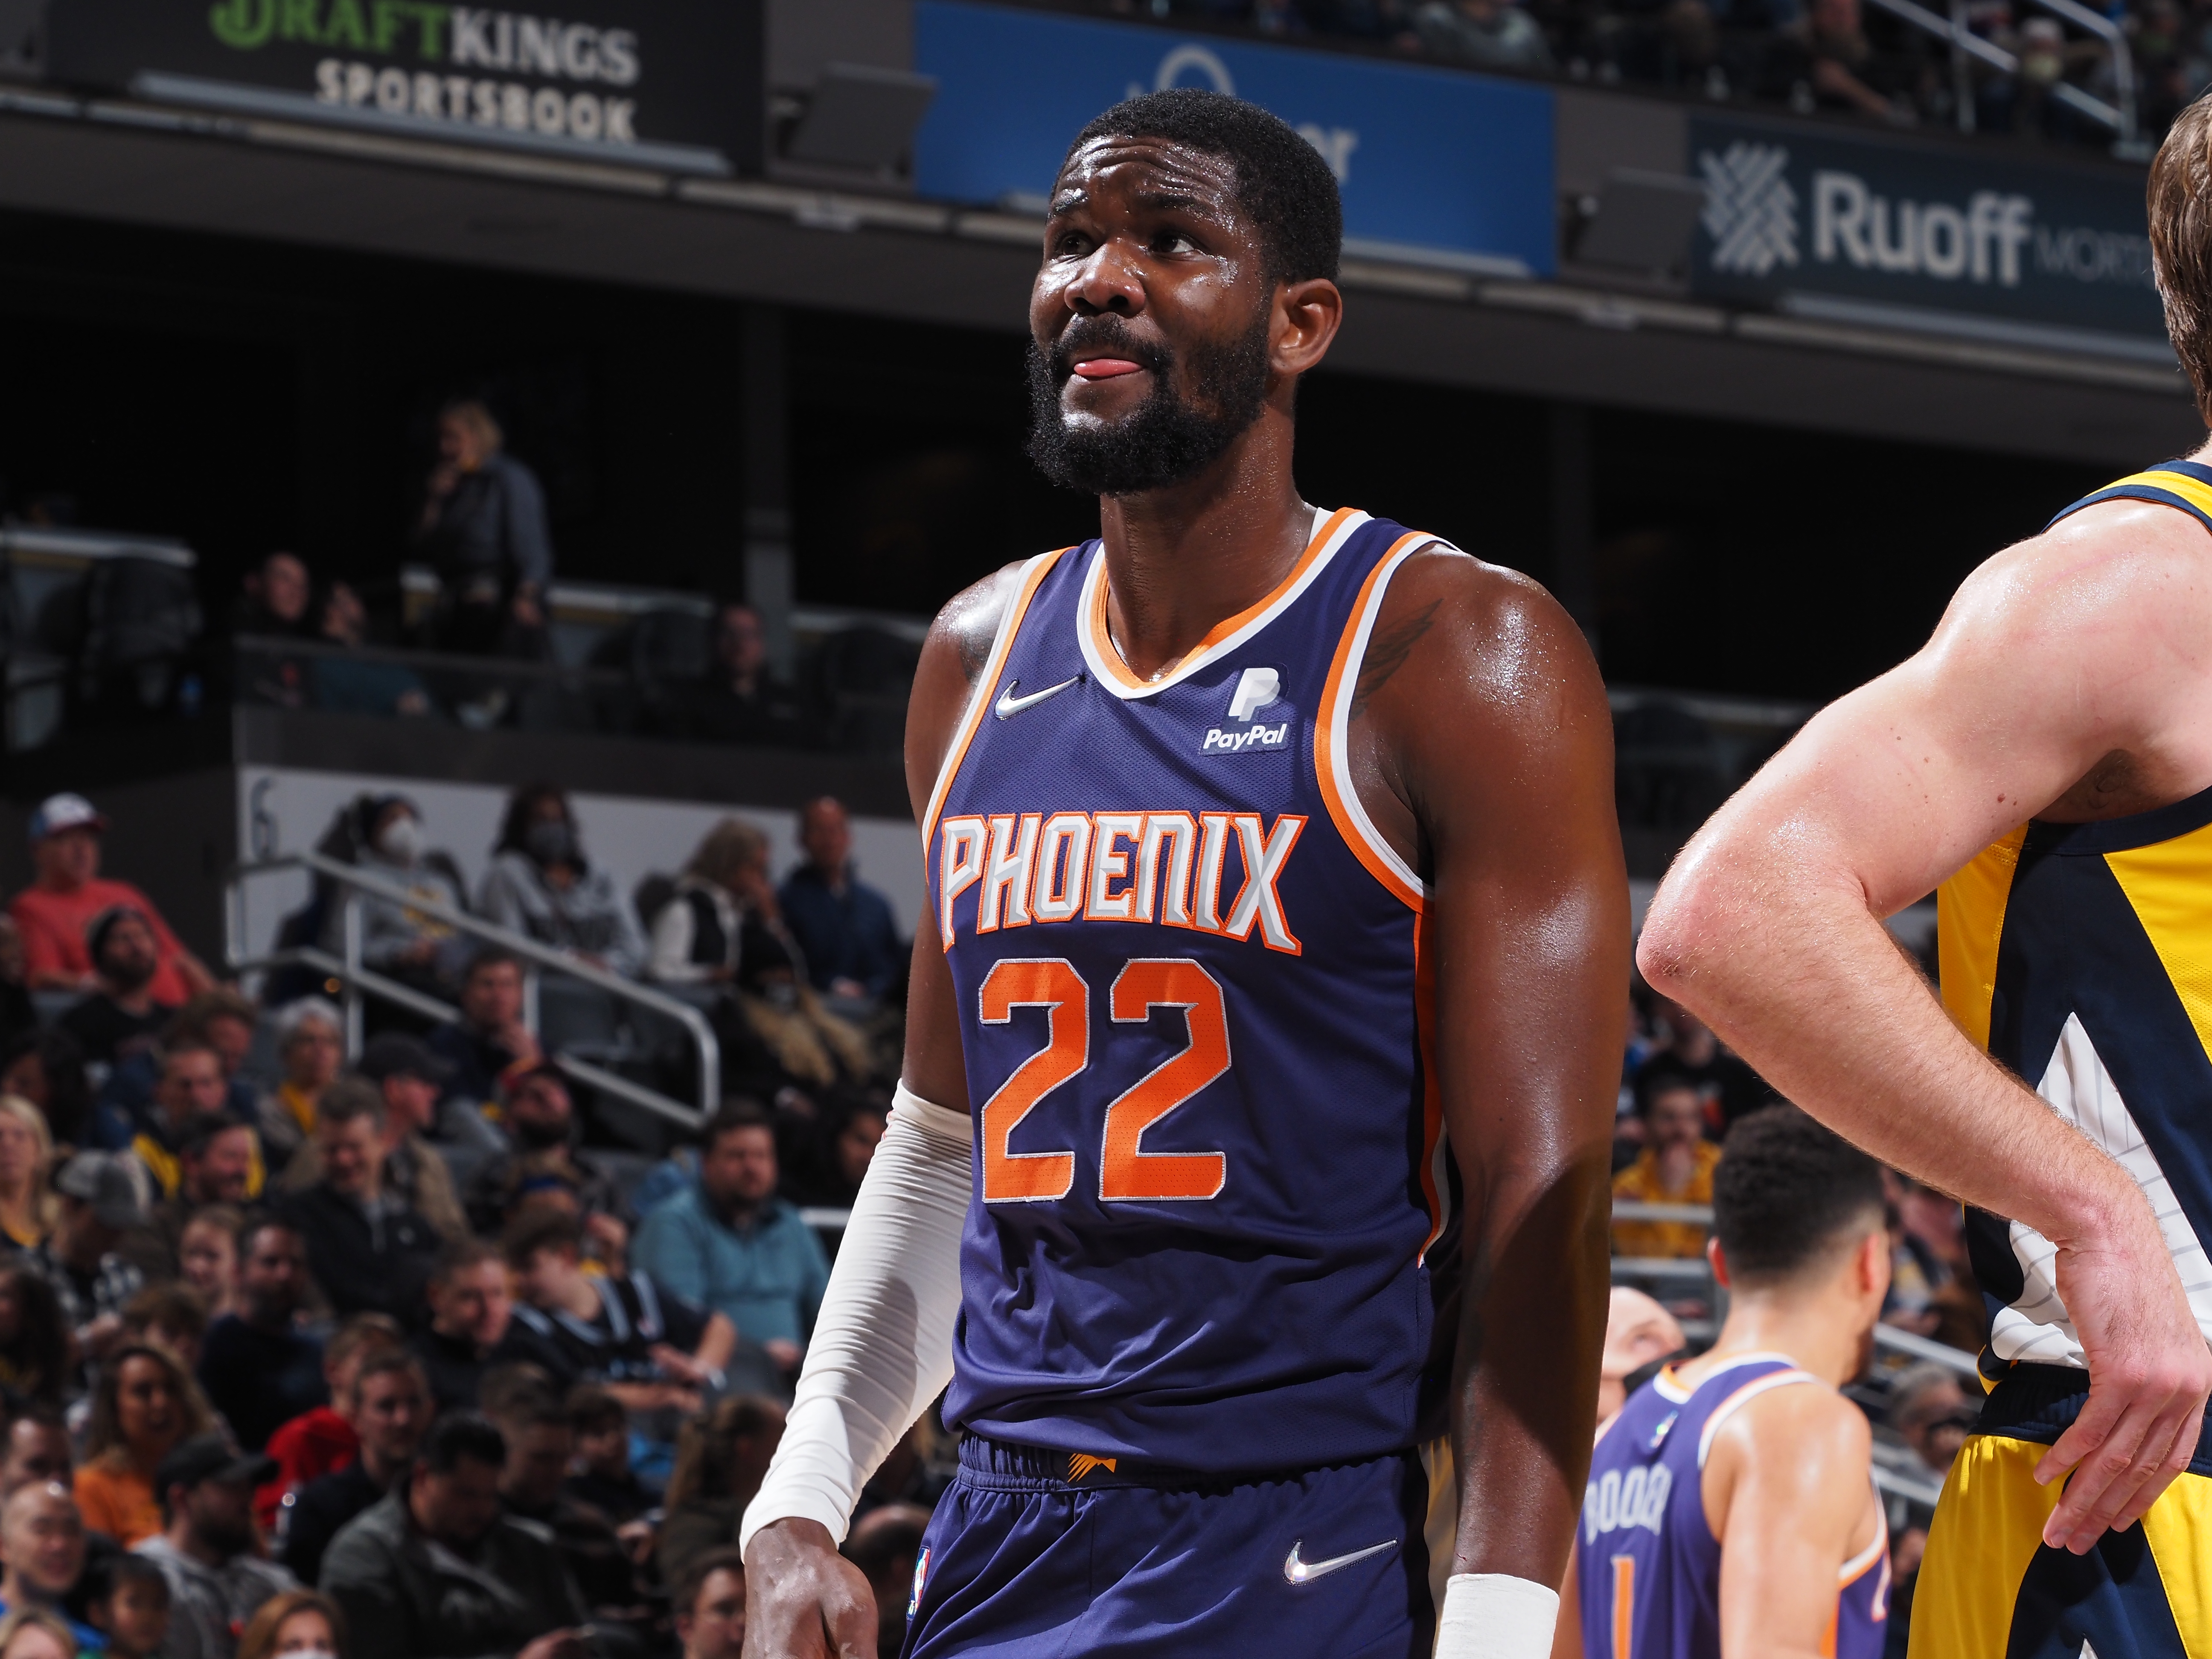 Deandre Ayton #22 of the Phoenix Suns looks on during the game against the Indiana Pacers on January 14, 2022 at Gainbridge Fieldhouse in Indianapolis, Indiana.